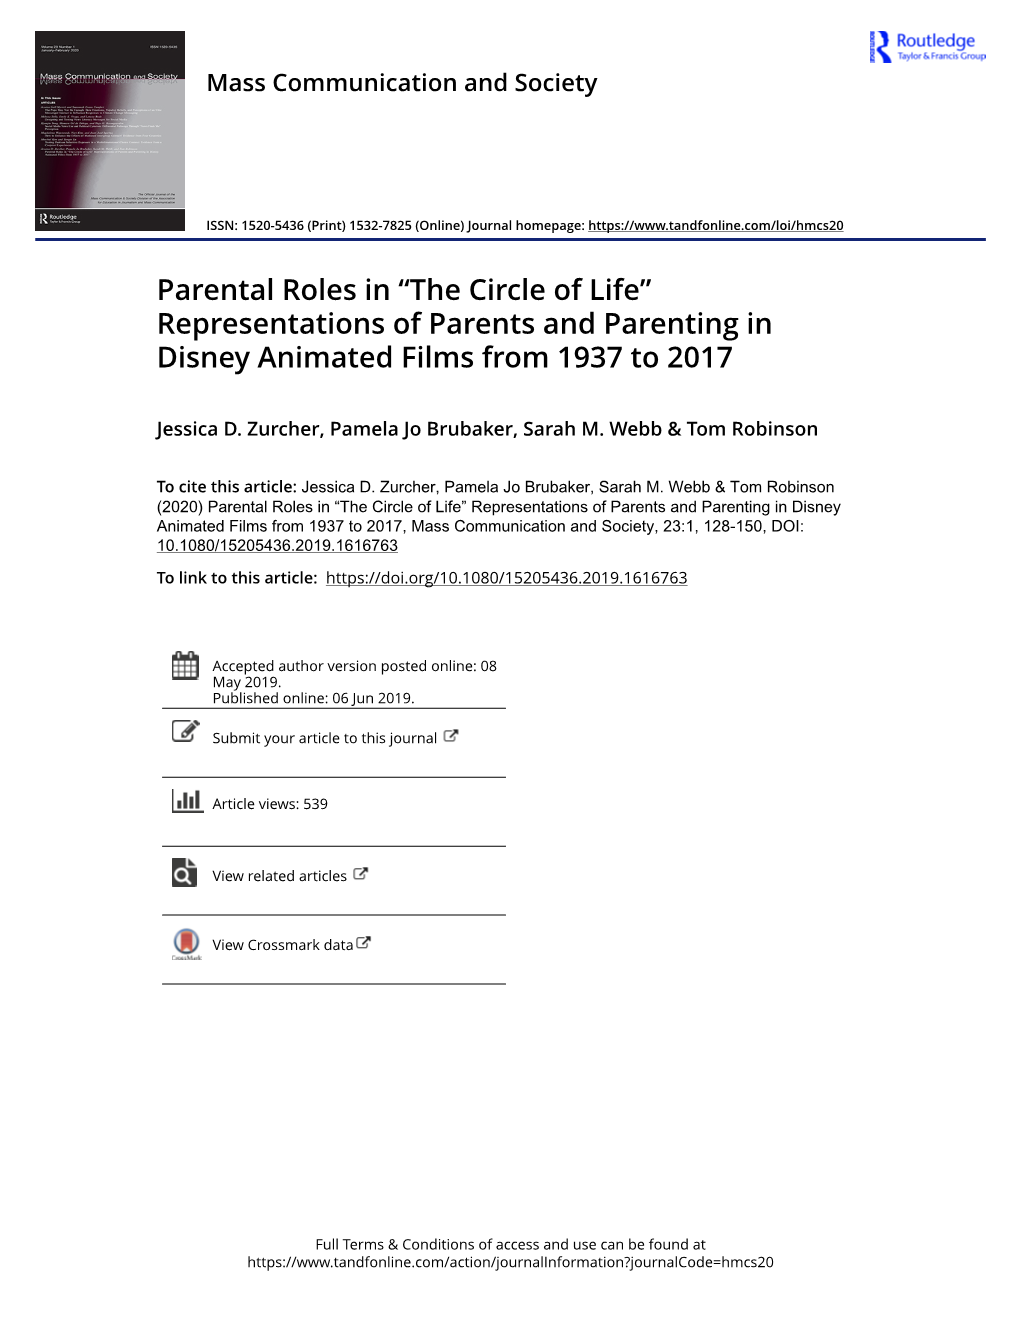 Representations of Parents and Parenting in Disney Animated Films from 1937 to 2017